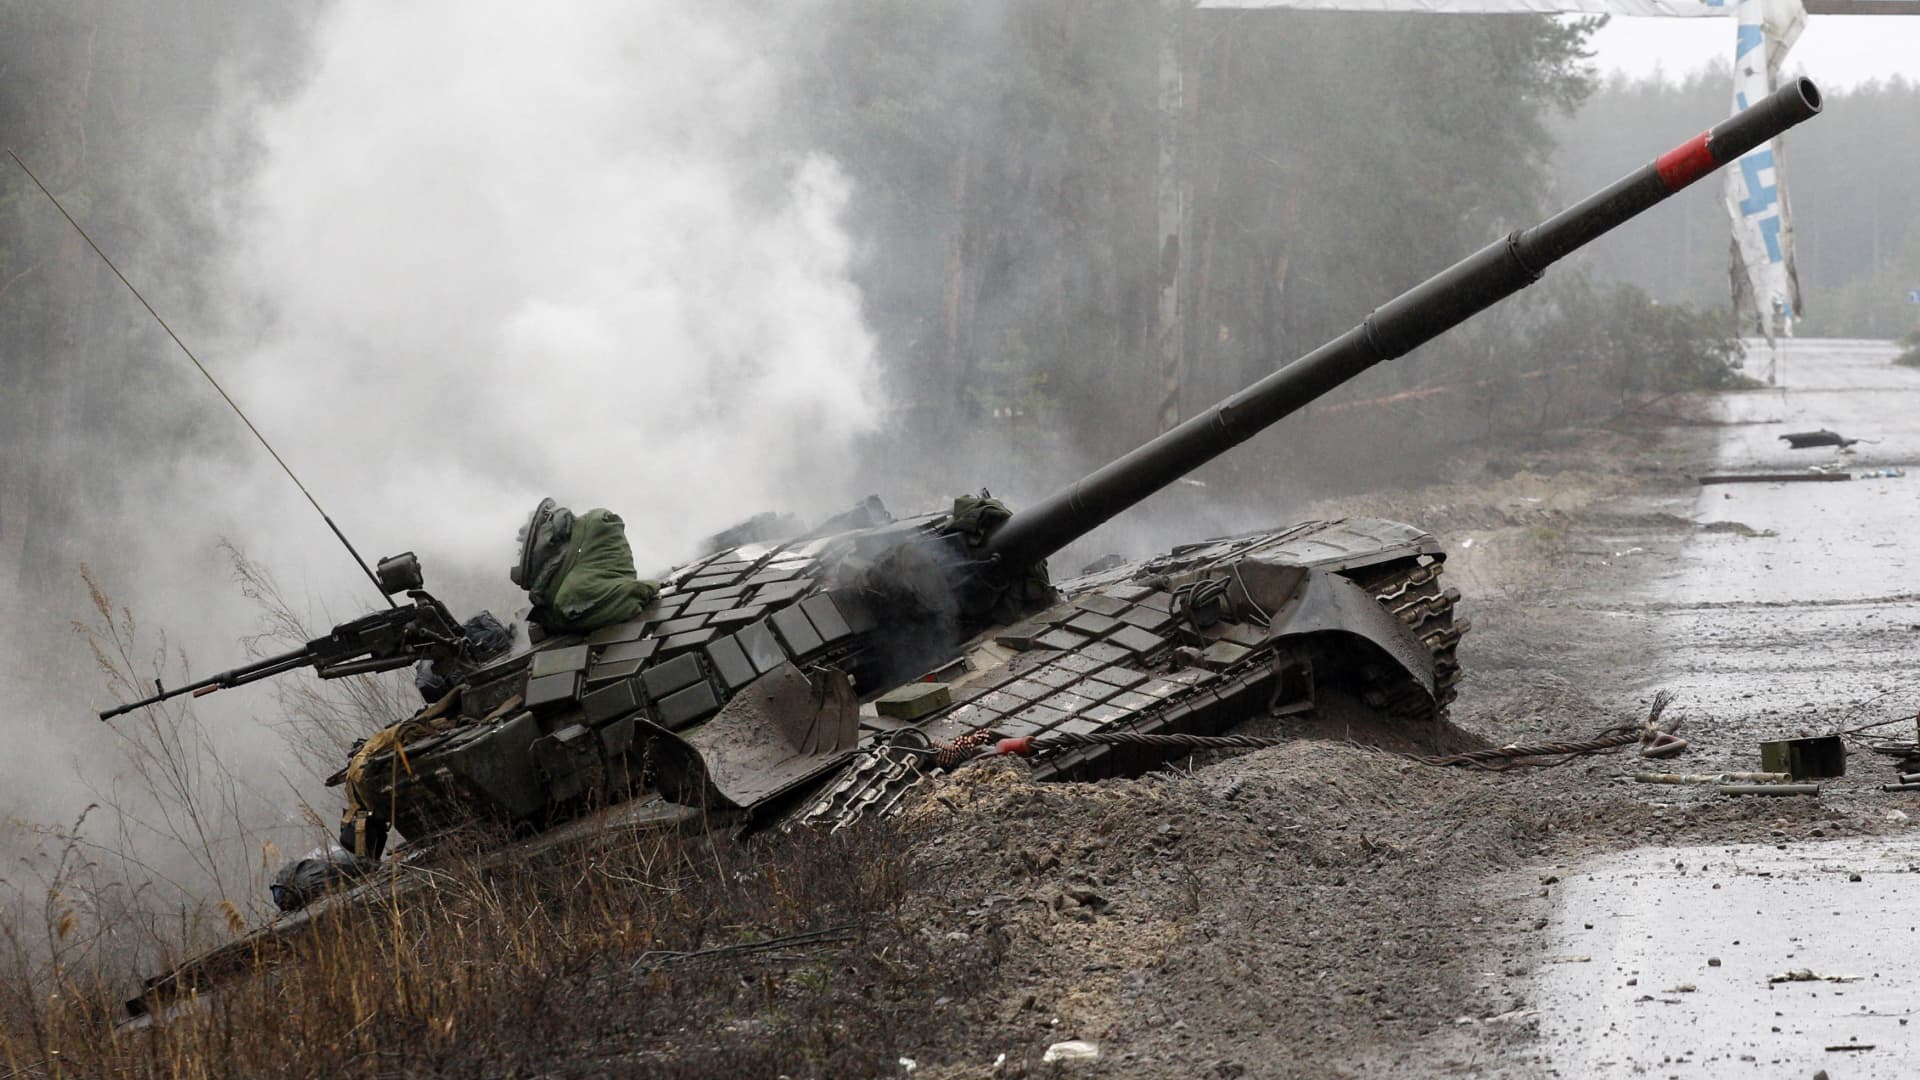 Smoke rises from a Russian tank destroyed by the Ukrainian troops on the side of a road in Lugansk region on February 26, 2022.